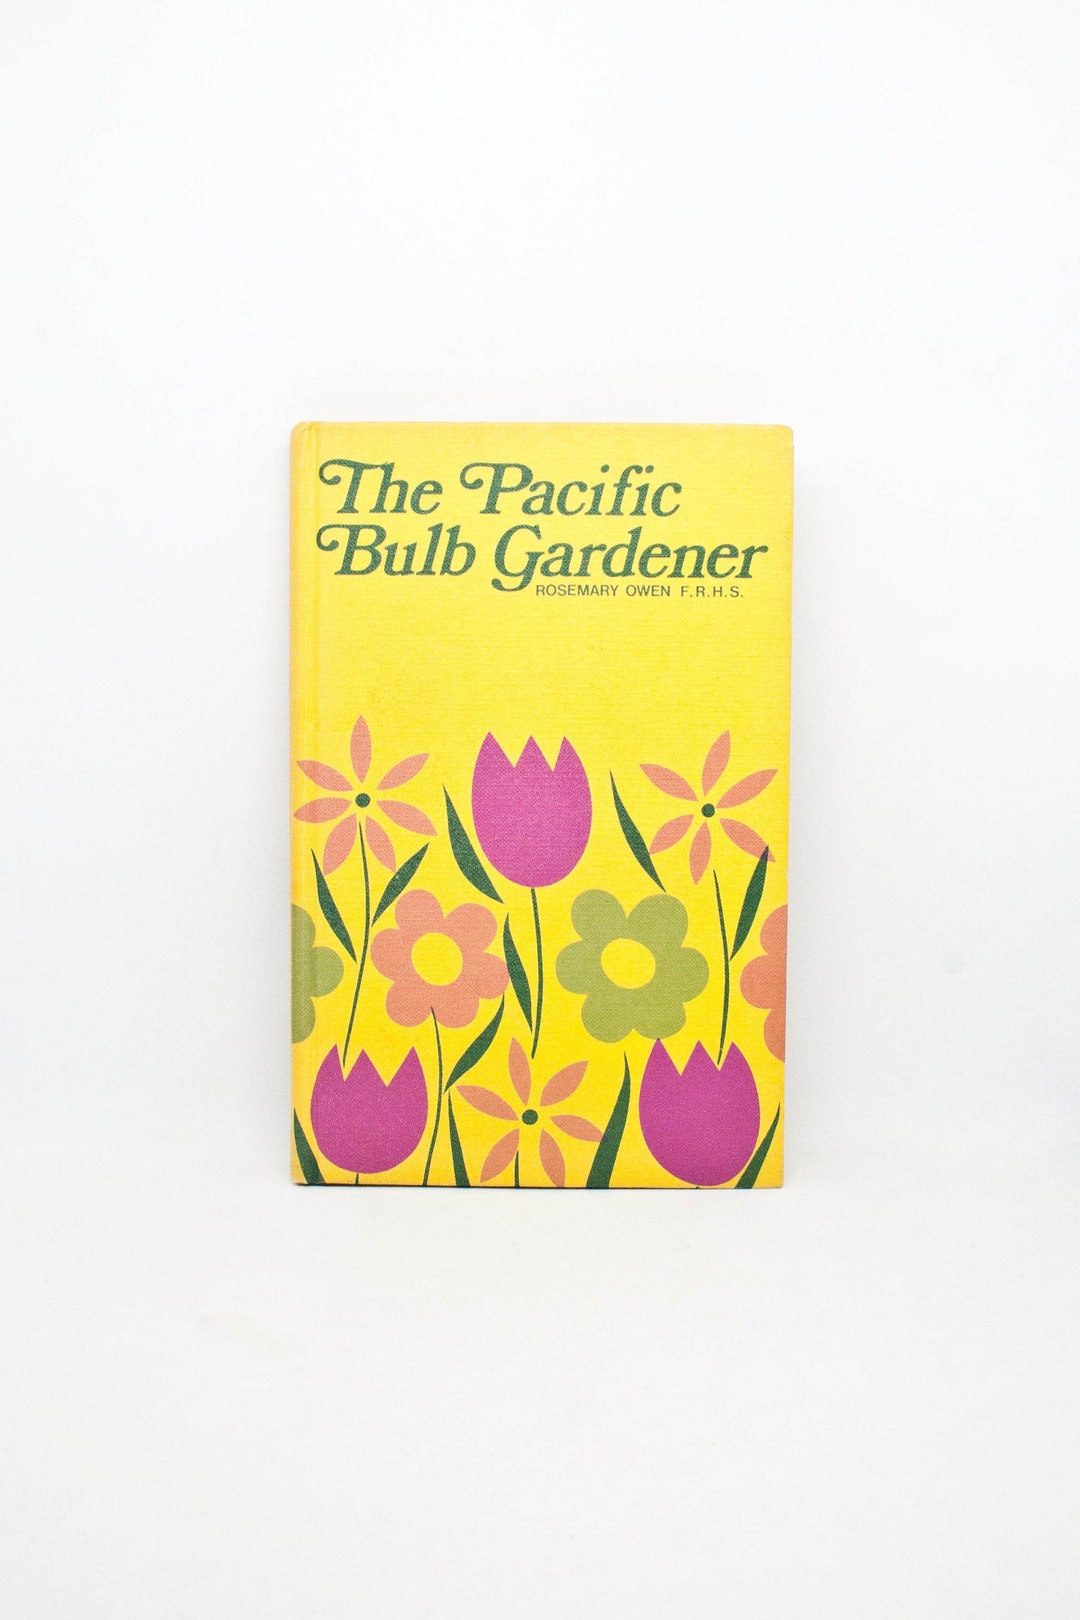 The Pacific Bulb Gardener Rosemary Owen 1971 Amateur hq nude picture